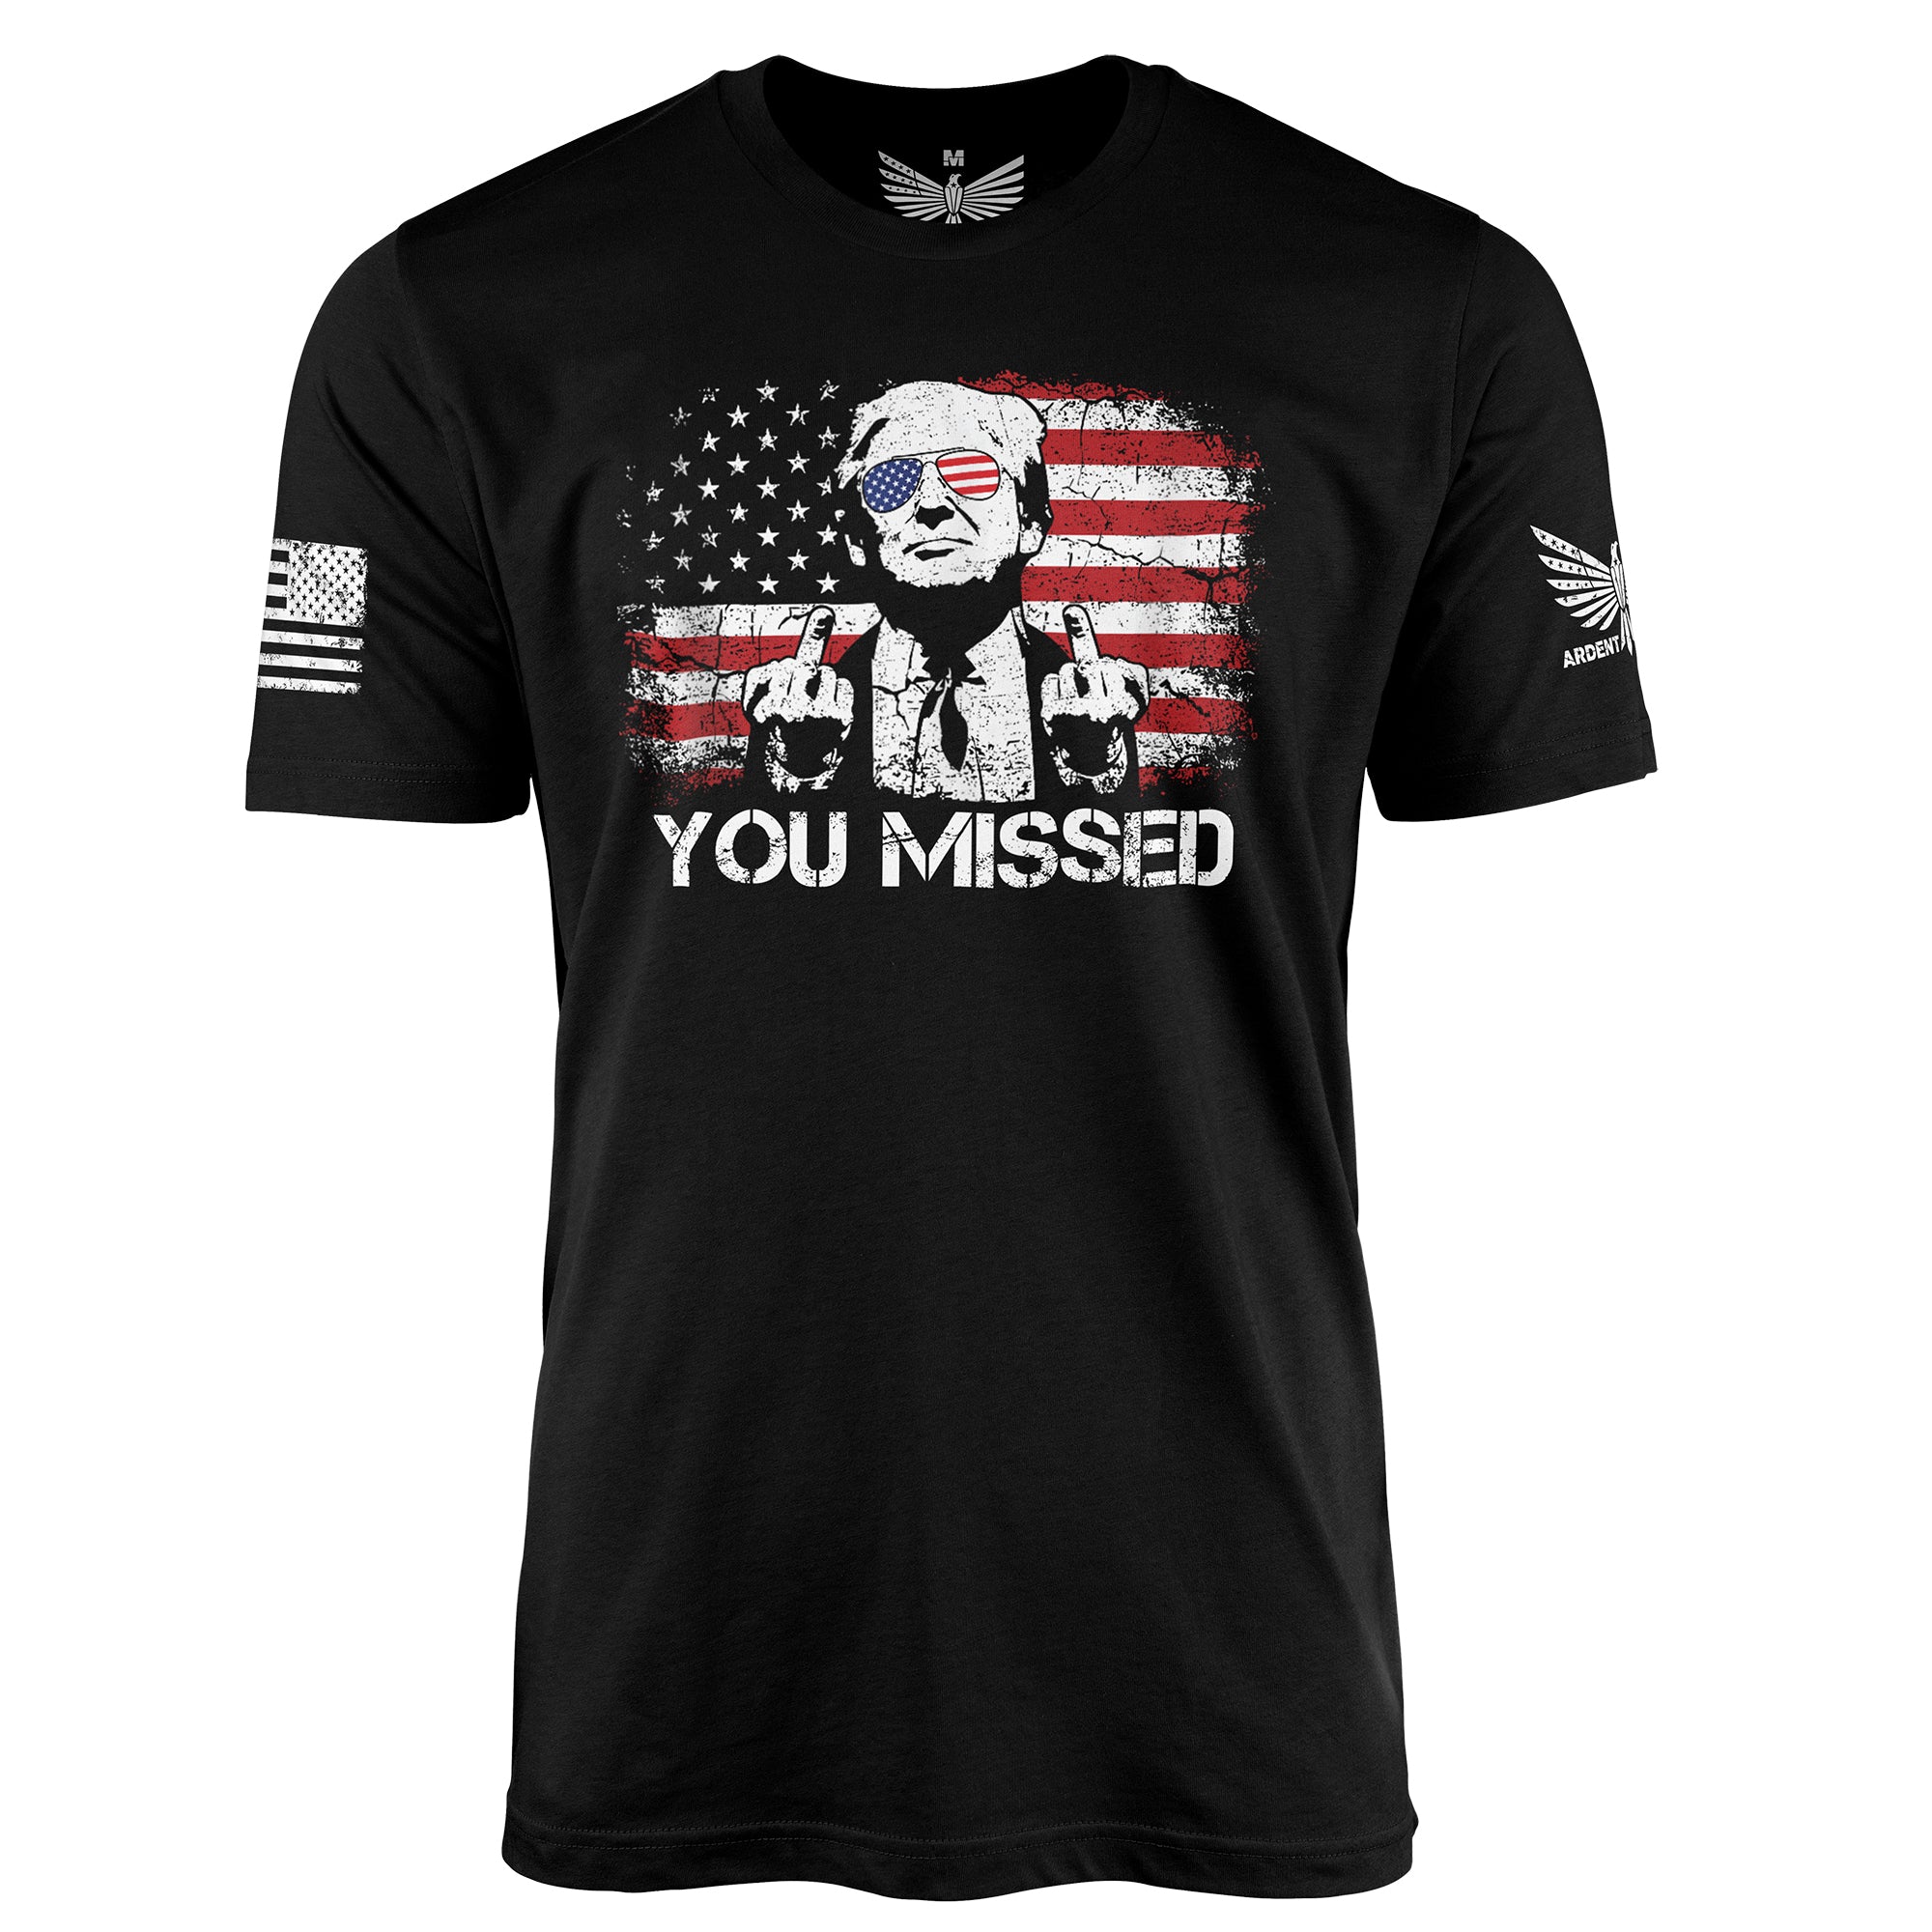 You Missed-Men's Shirt-S-Ardent Patriot Apparel Co.